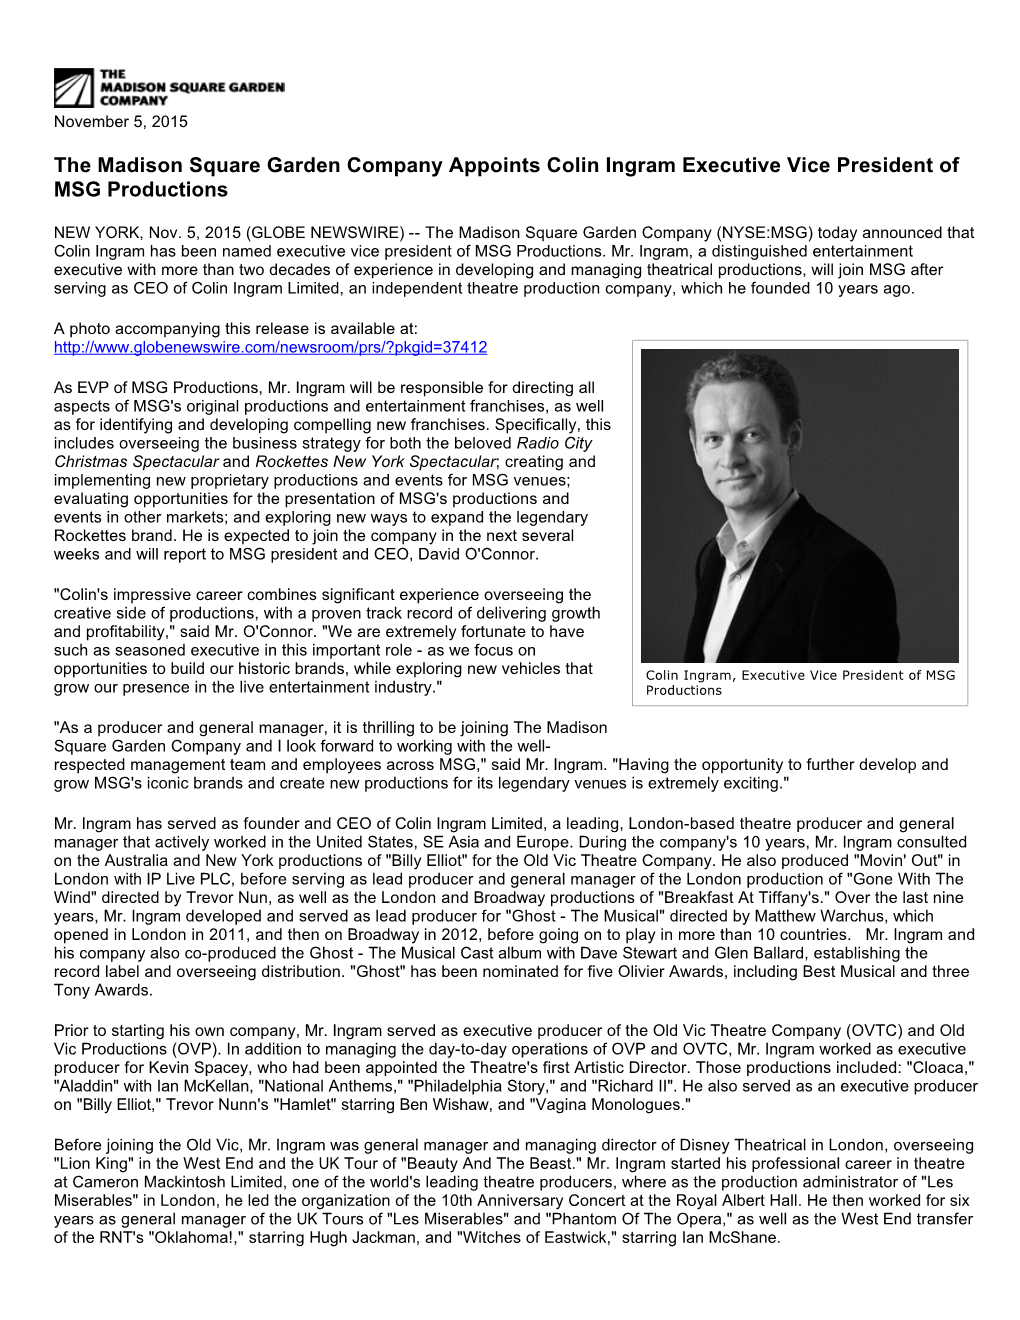 The Madison Square Garden Company Appoints Colin Ingram Executive Vice President of MSG Productions